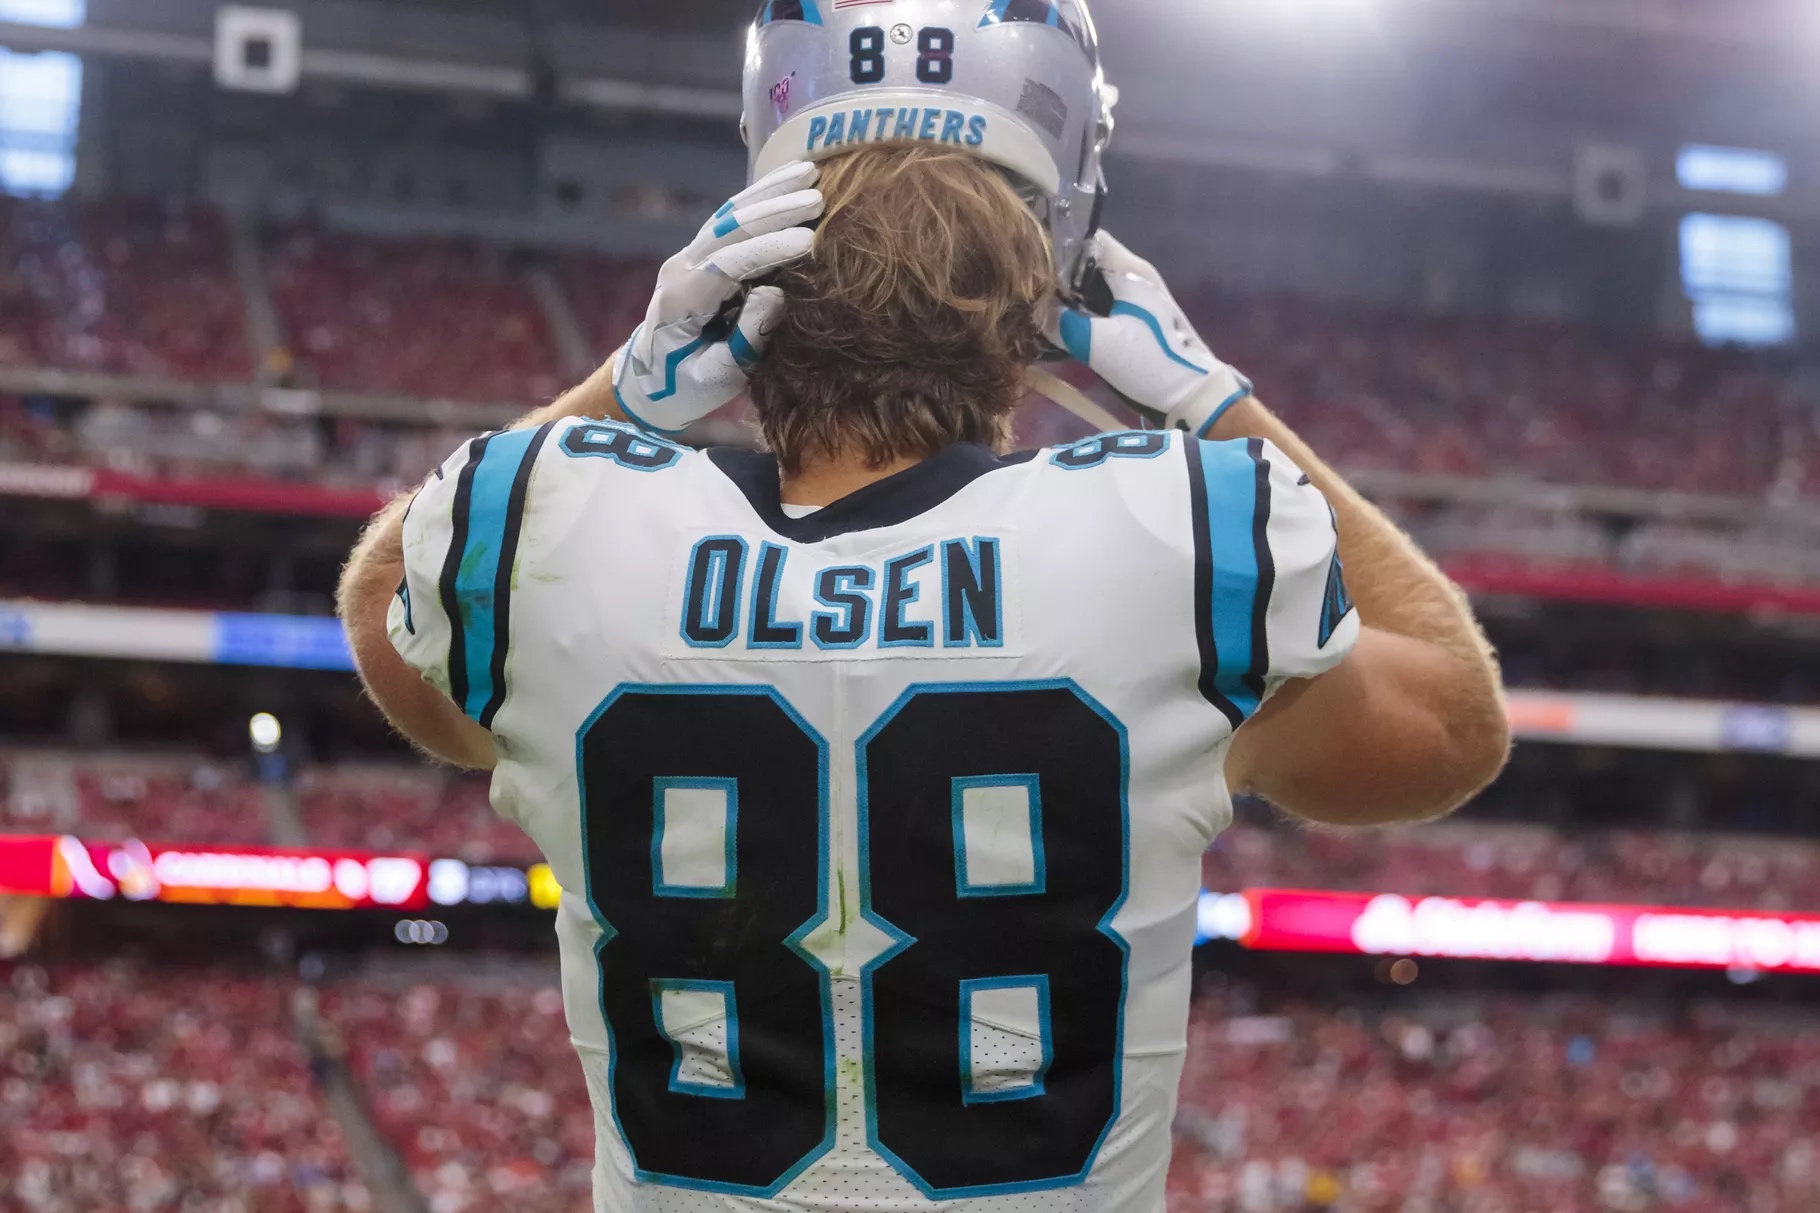 Greg Olsen and the Heartest Yard Congenital Heart Center leave a lasting legacy